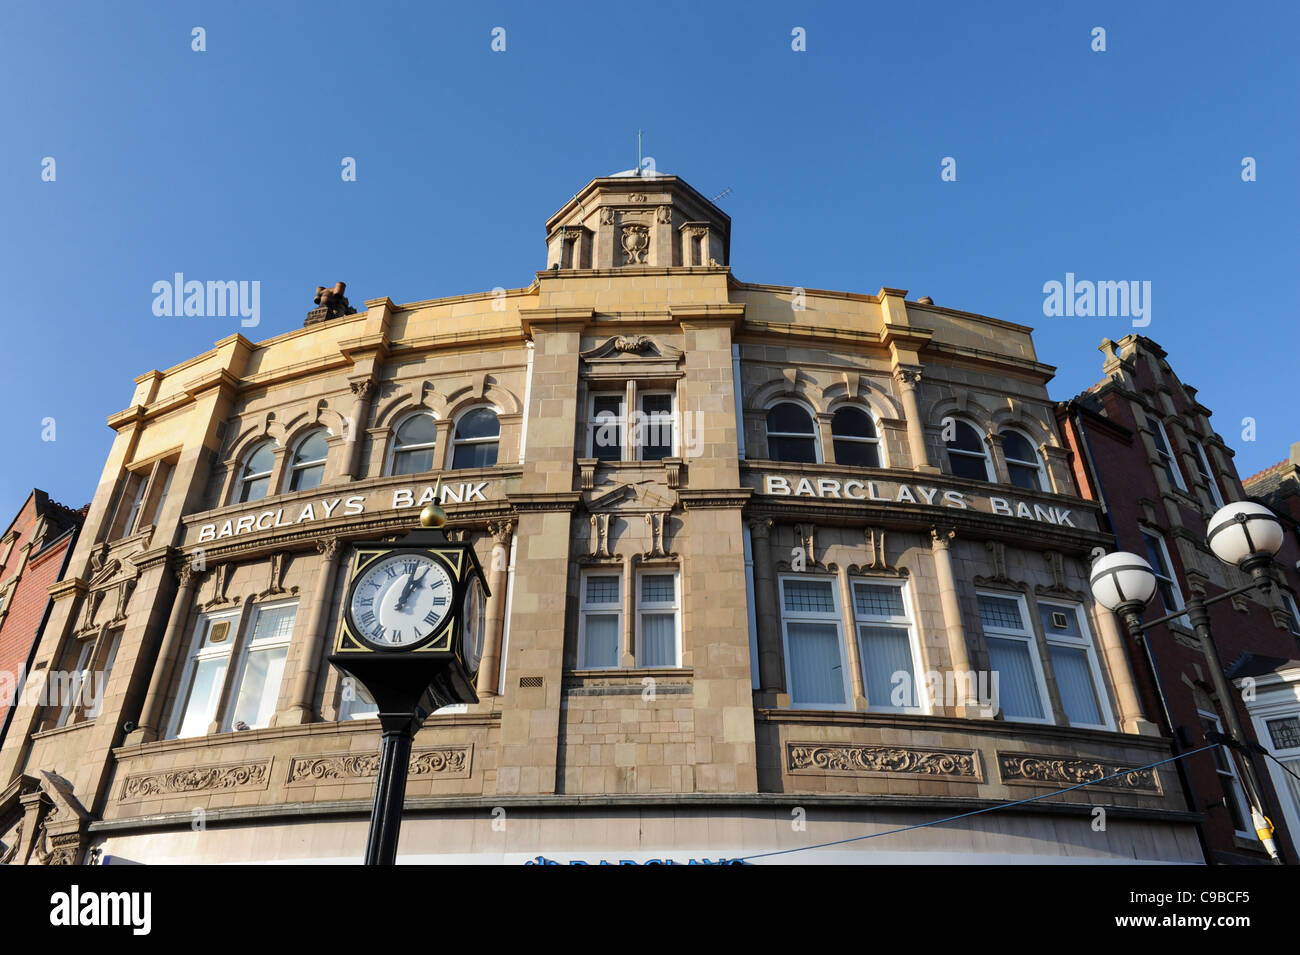 Barclays Bank and town clock in Worksop Nottinghamshire, England. Uk Stock Photo